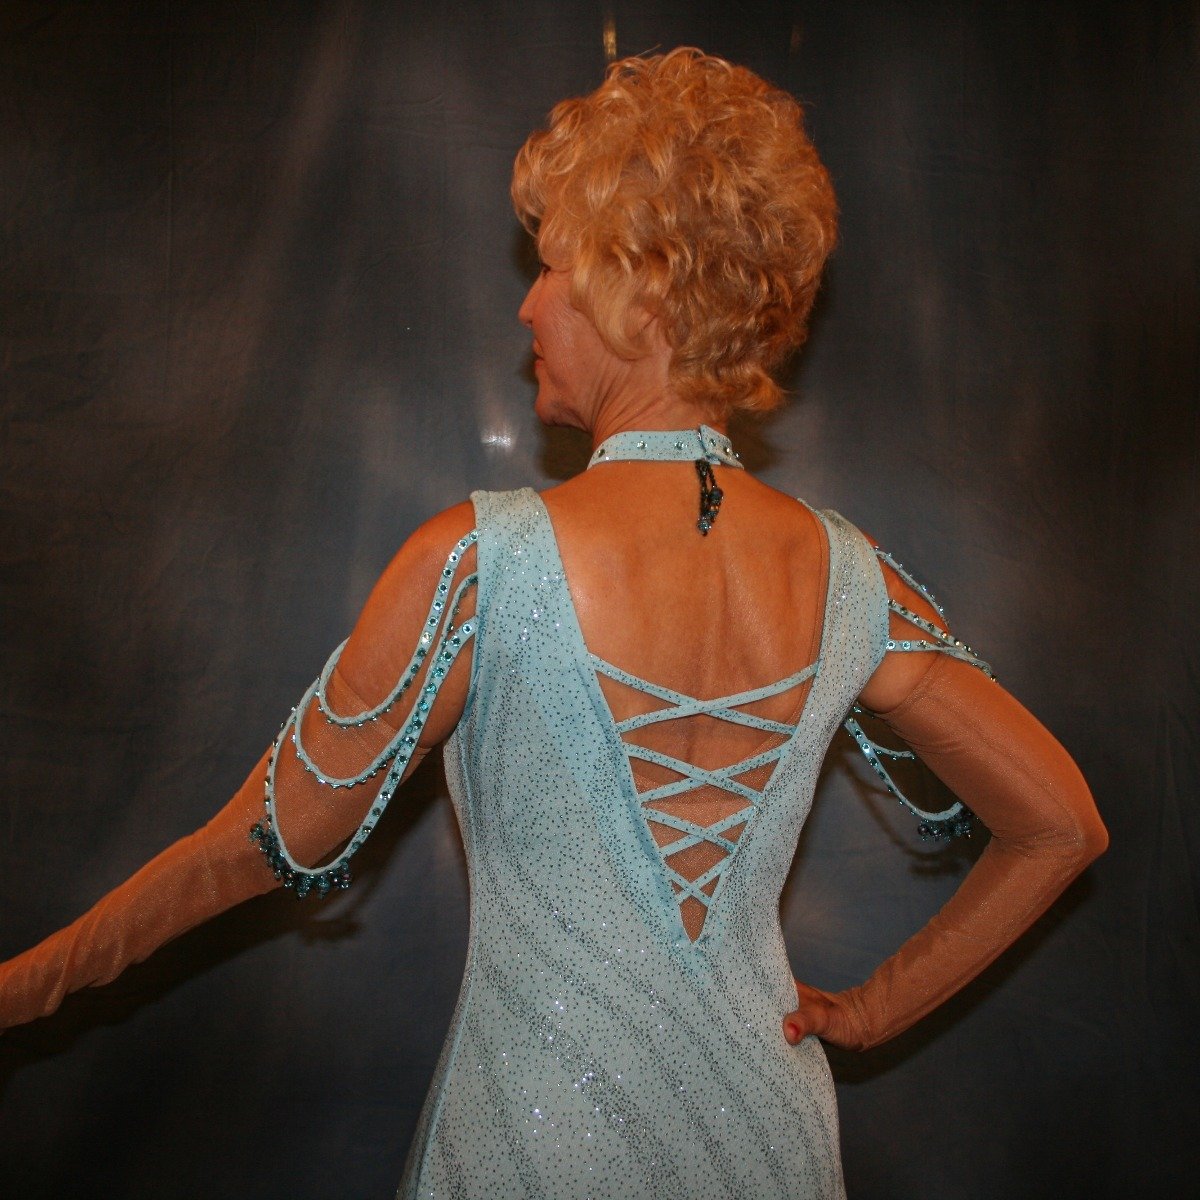 Crystal's Creations close up back view of Soft blue ballroom dress with chandelle feathers was created of a gorgeous glitter slinky with a wave pattern, has strap detailing on the low back, embellished with Swarovski rhinestones & hand beading on the arm draping straps & matching neck piece.